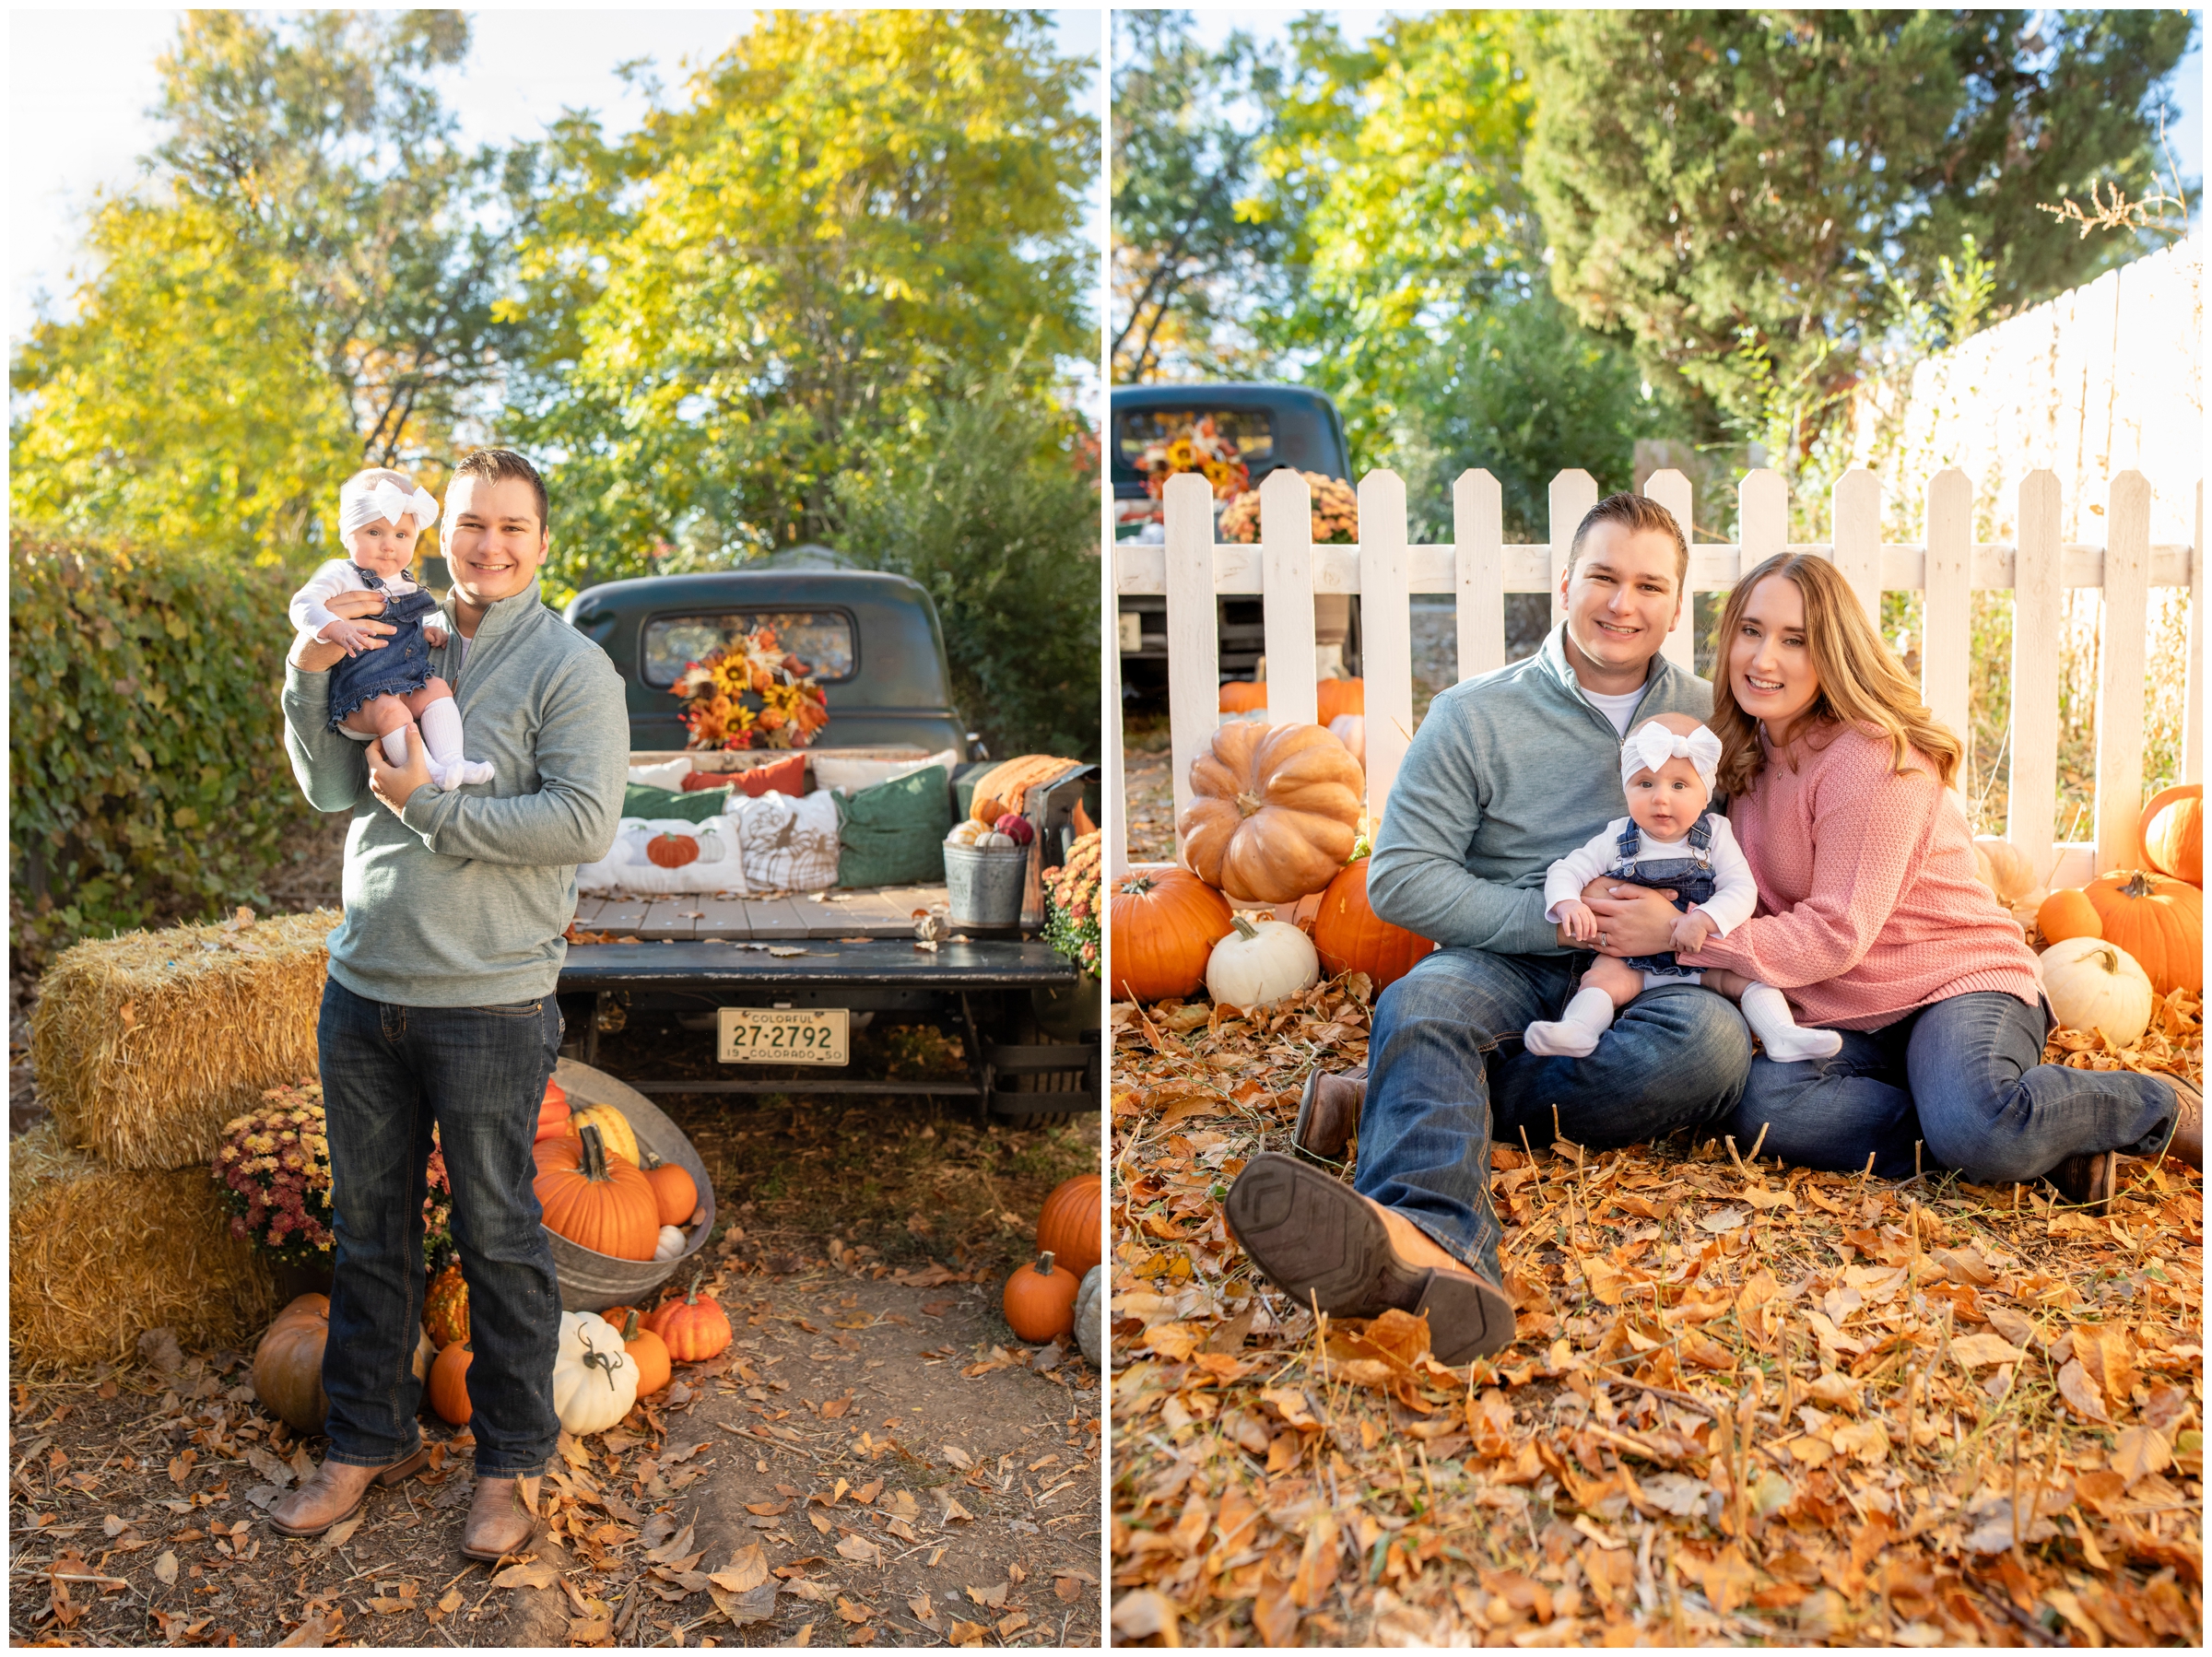 Fall family mini sessions with a vintage truck and pumpkins by Frederick Colorado photographer Plum Pretty Photography